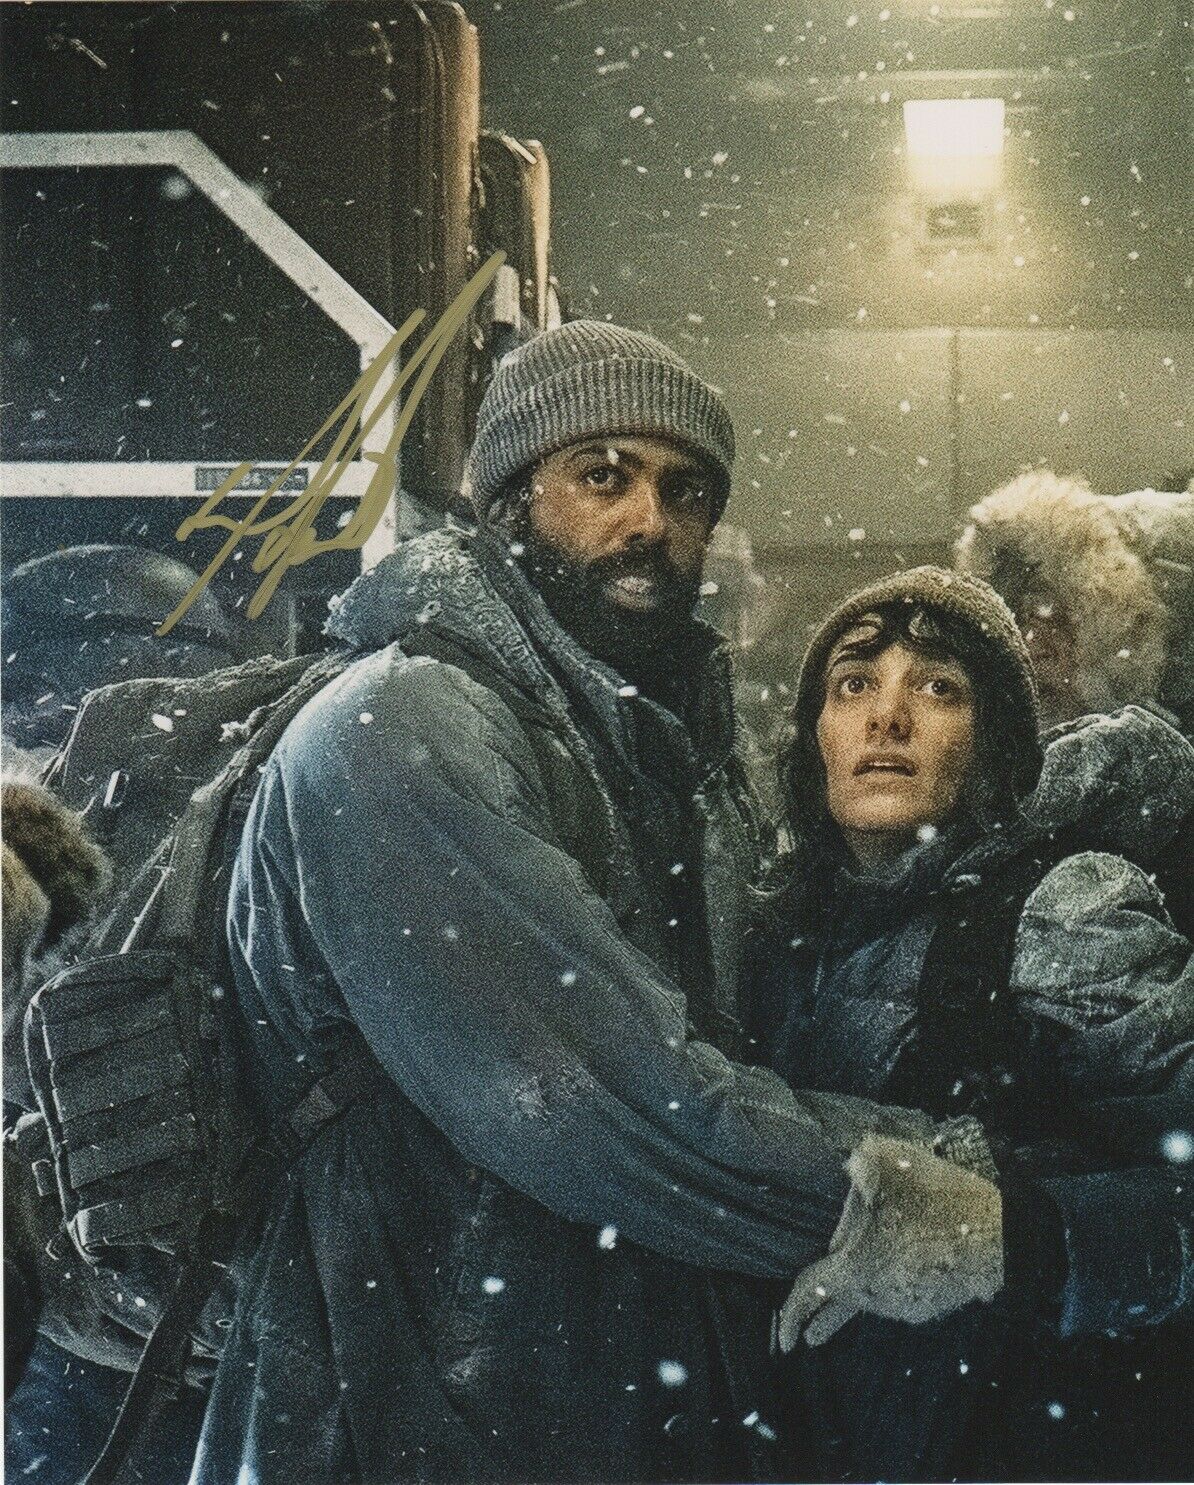 Daveed Diggs Snowpiercer Signed Autograph 8x10 Photo #5 - Outlaw Hobbies Authentic Autographs